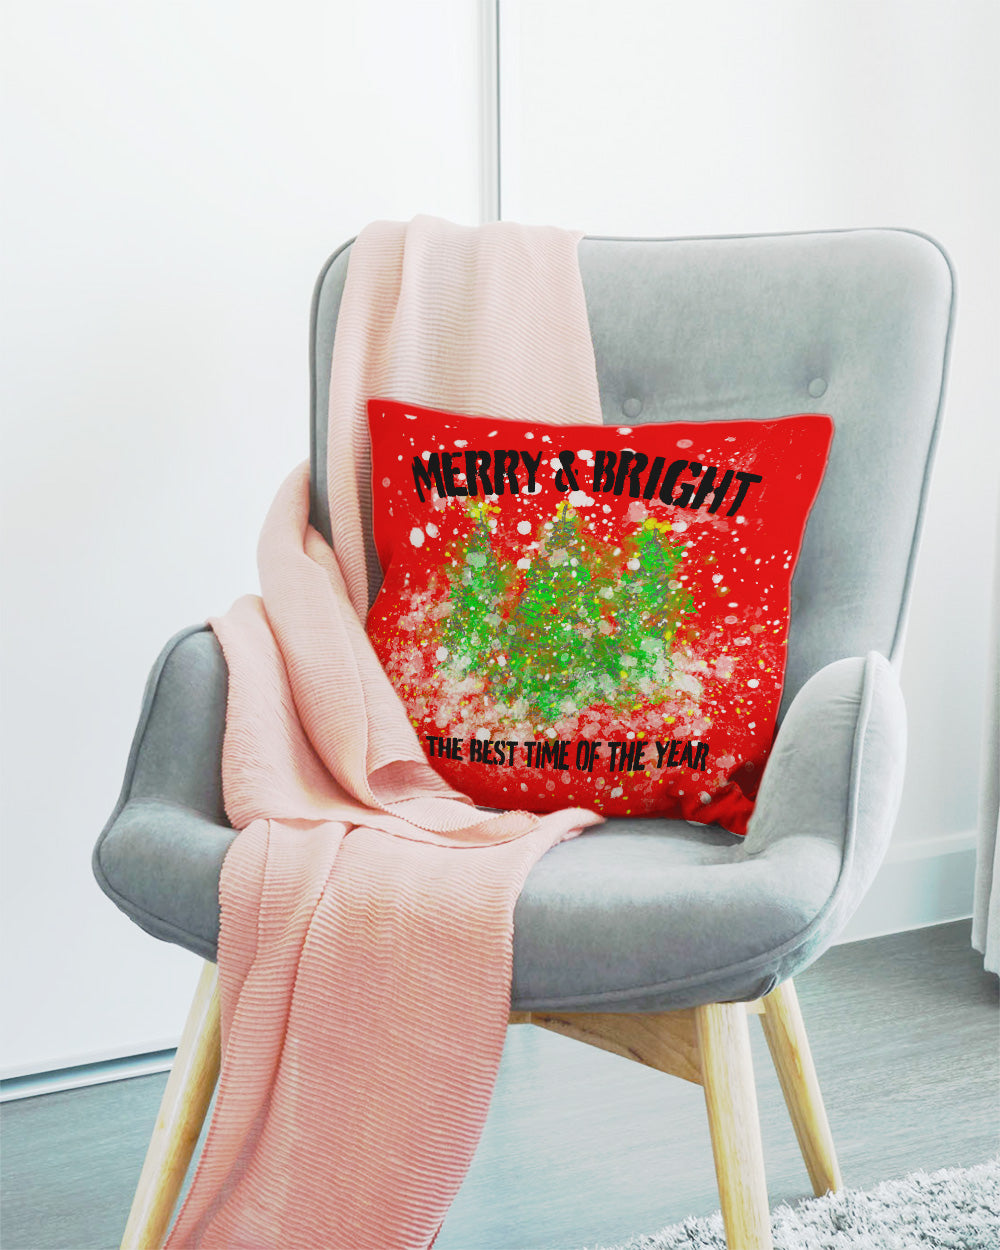 Snowy Christmas Holiday Trees Watercolor Throw Premium Pillow - Red Throw Pillows A Moment Of Now Women’s Boutique Clothing Online Lifestyle Store